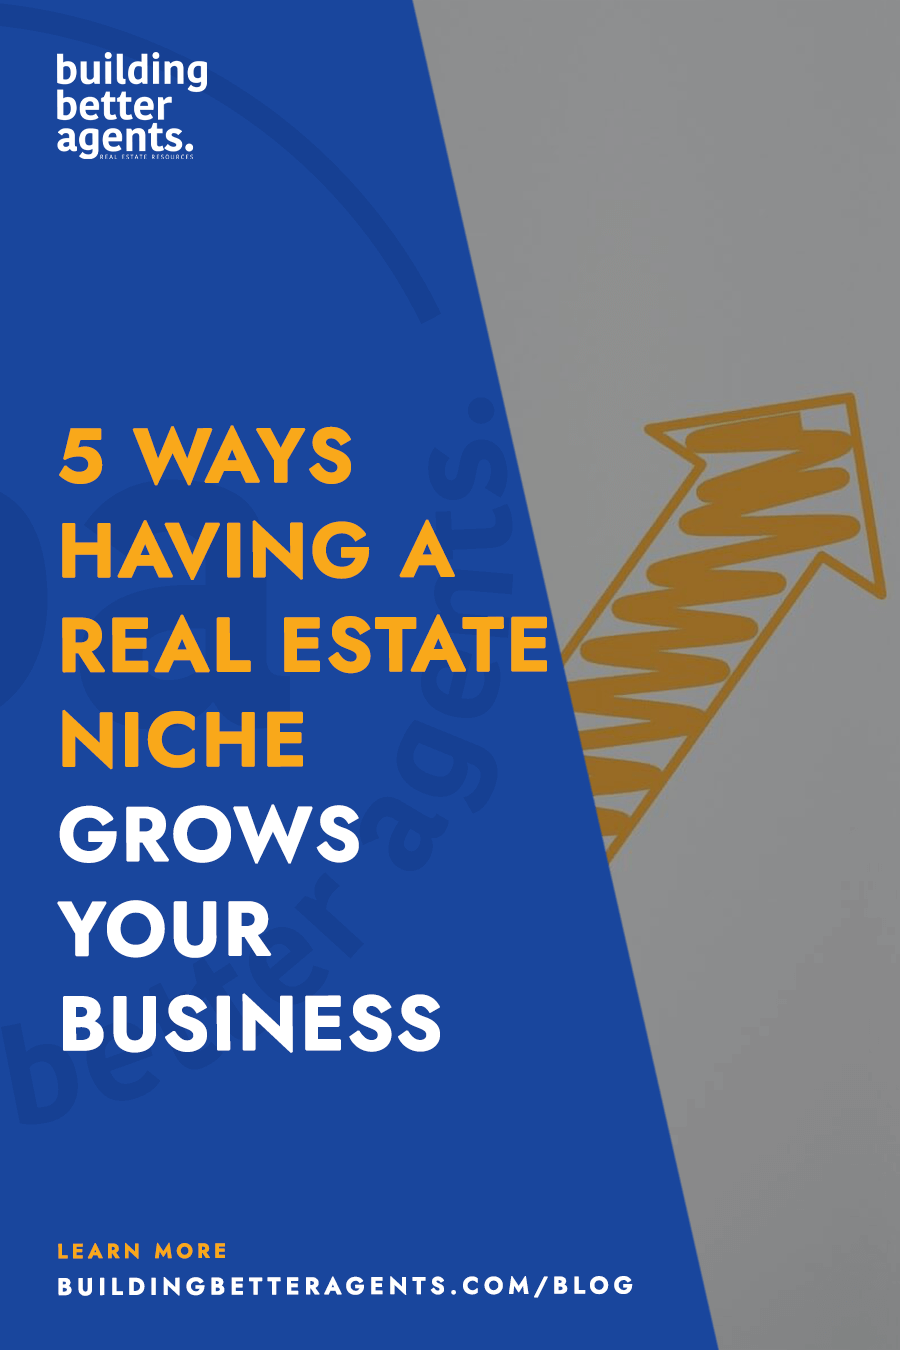 5 Ways Having a Real Estate Niche Grows Your Business